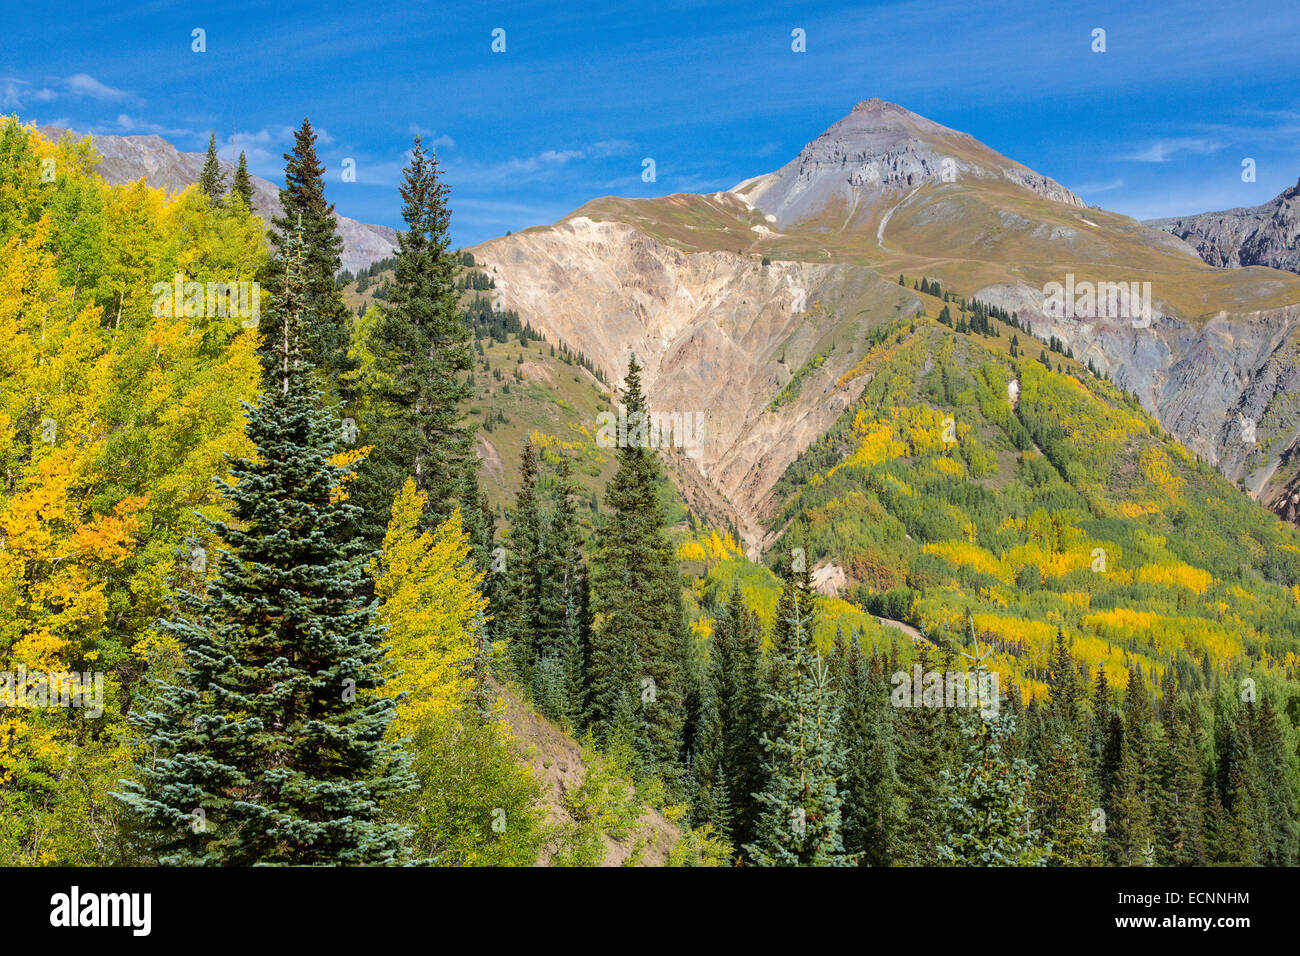 Fall in the Rocky Mountains along Route 550, The Million Dollar Highway in the Ouray, Silverton area of Colorado Stock Photo